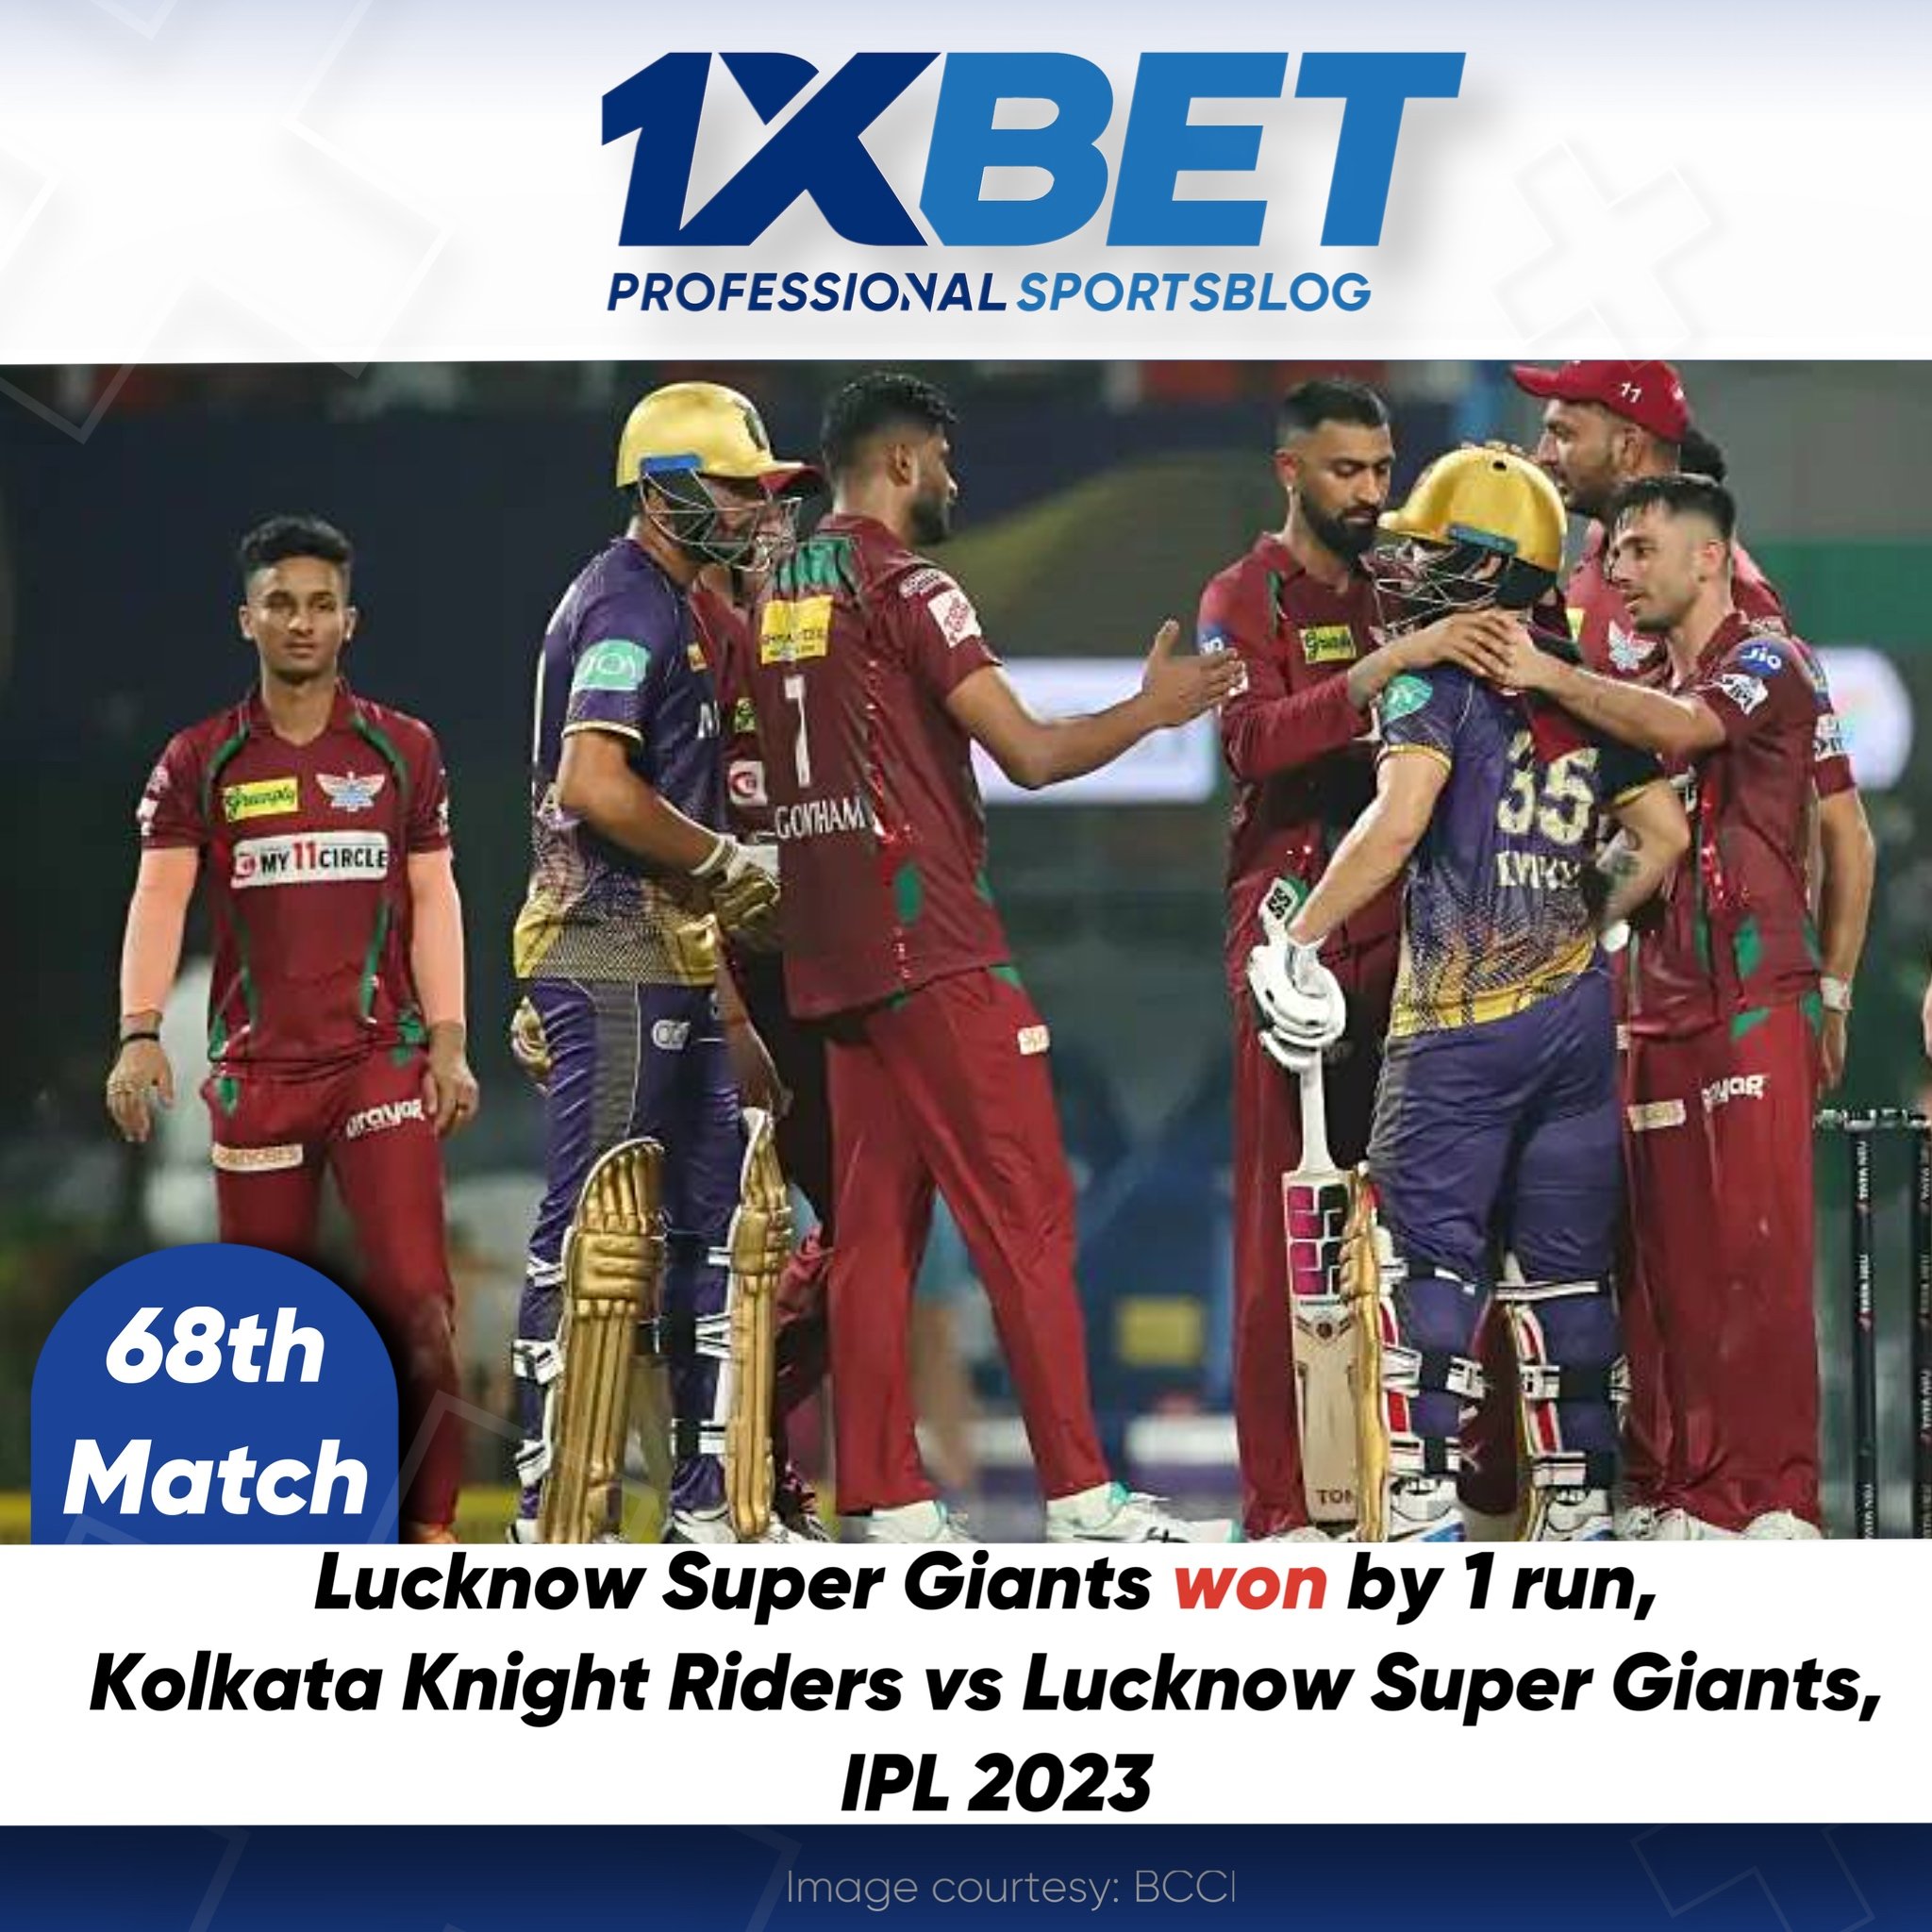 Lucknow Super Giants won by 1 run